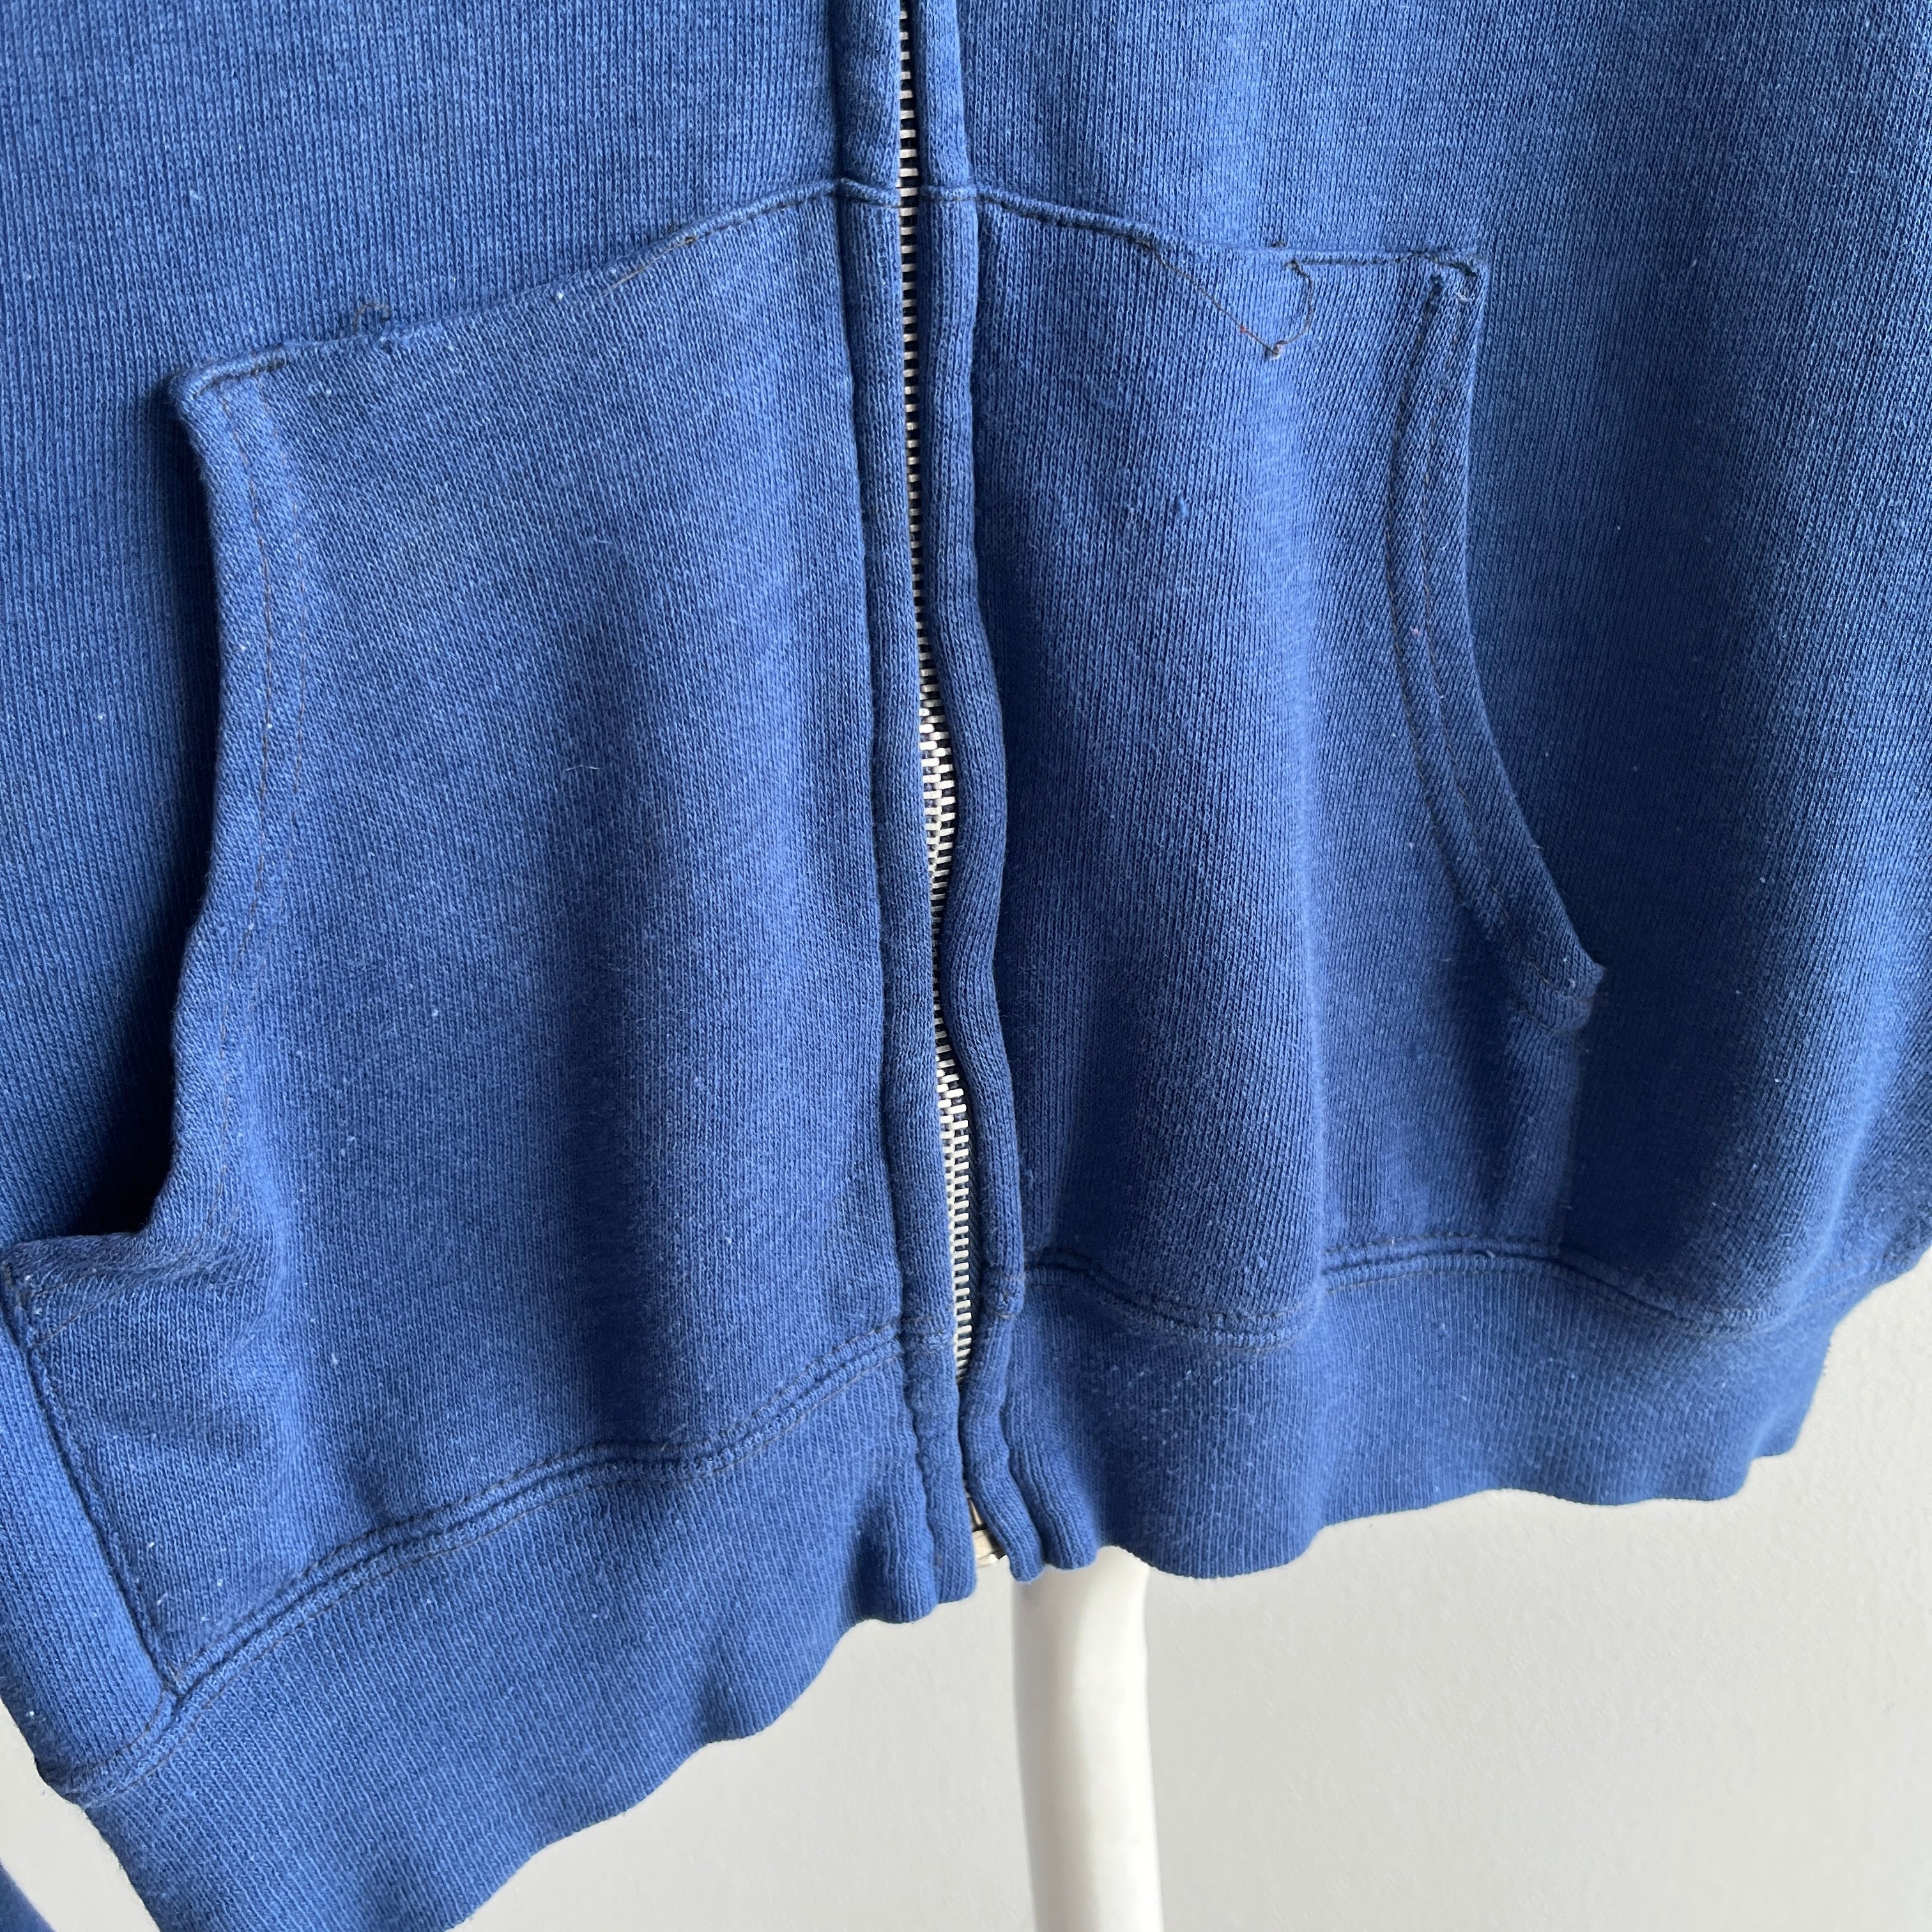 1970/80s Soft and Slouchy Beat Up Faded Navy Zip Up Hoodie Sweatshirt